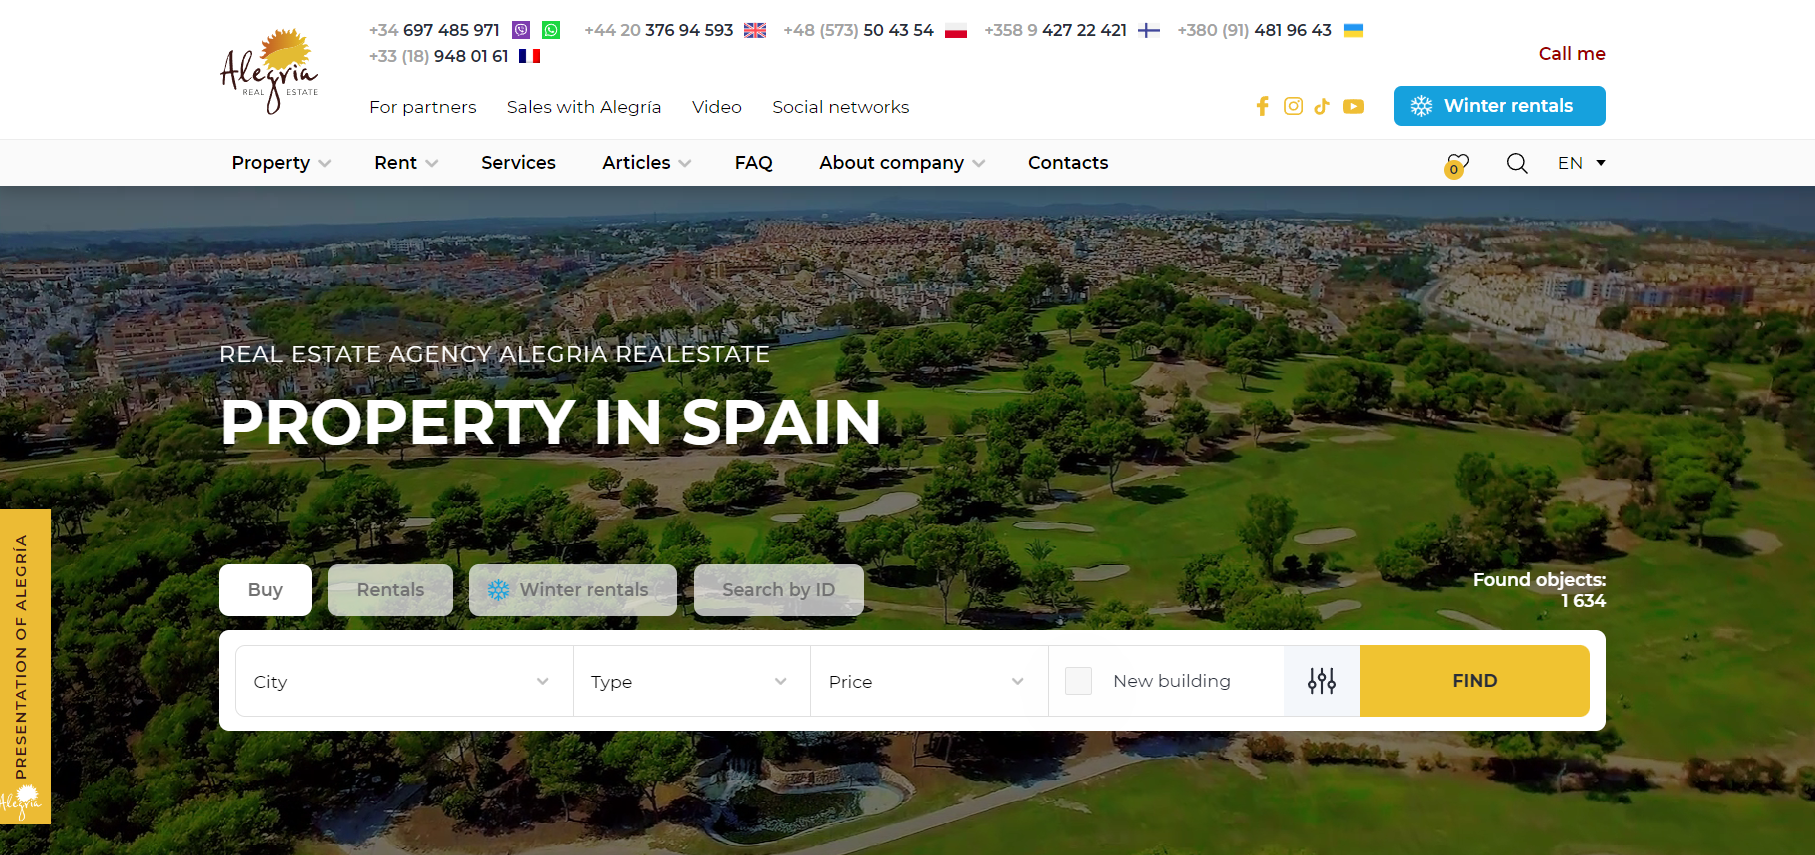 Real Estate Agency Alegria in Spain: How They Mislead Clients and Disappoint Their Expectations